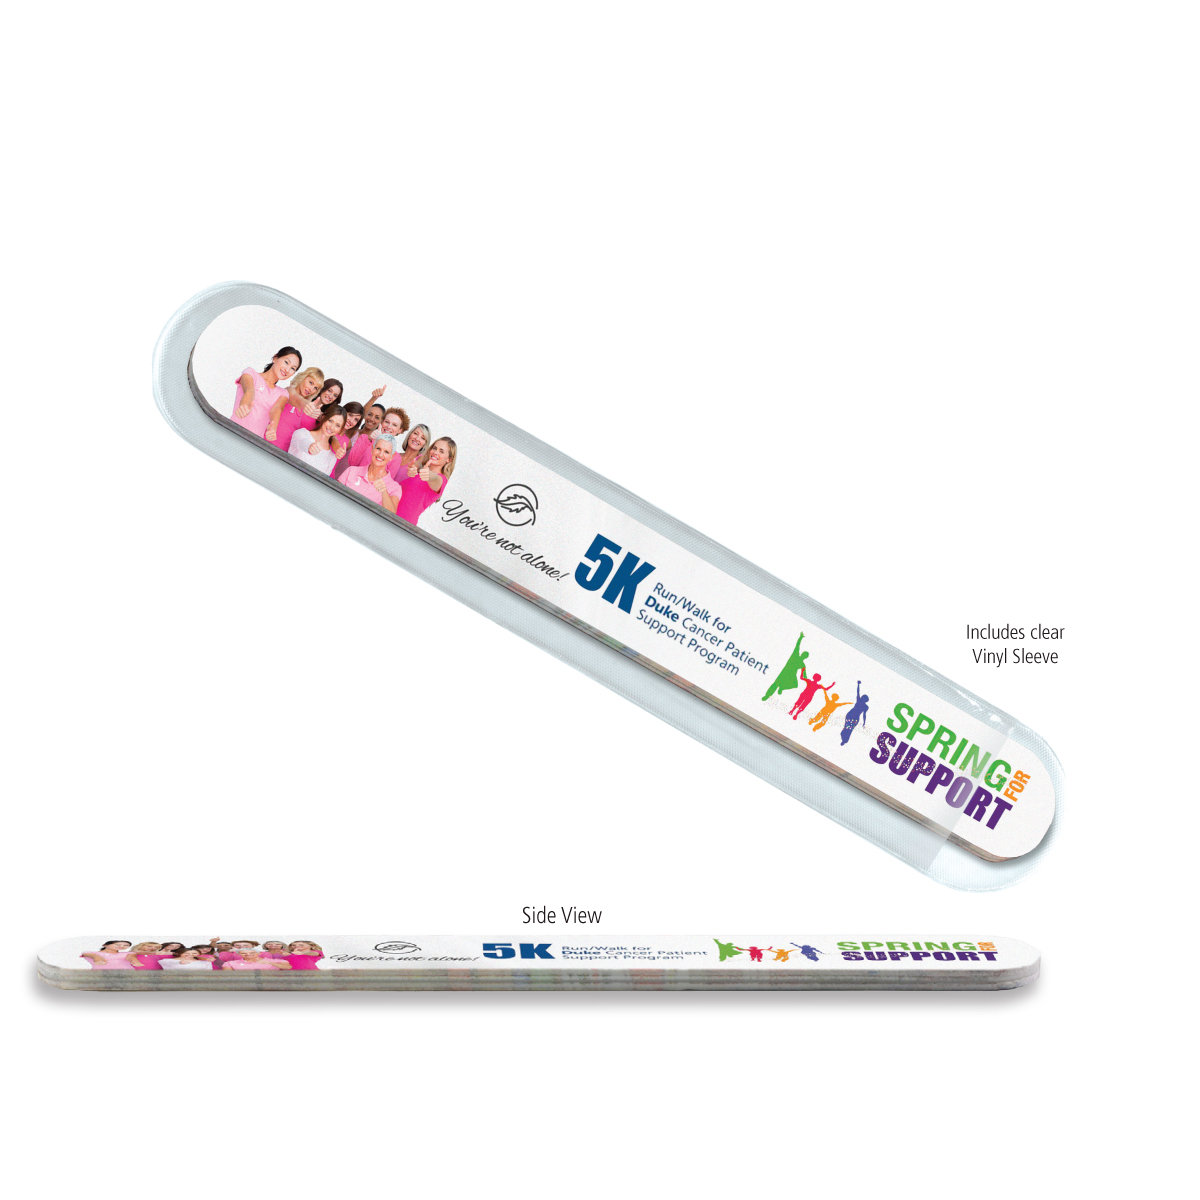 Multi-Color Thick Foam Nail File. Full color. Can be a business card. $0.79 each